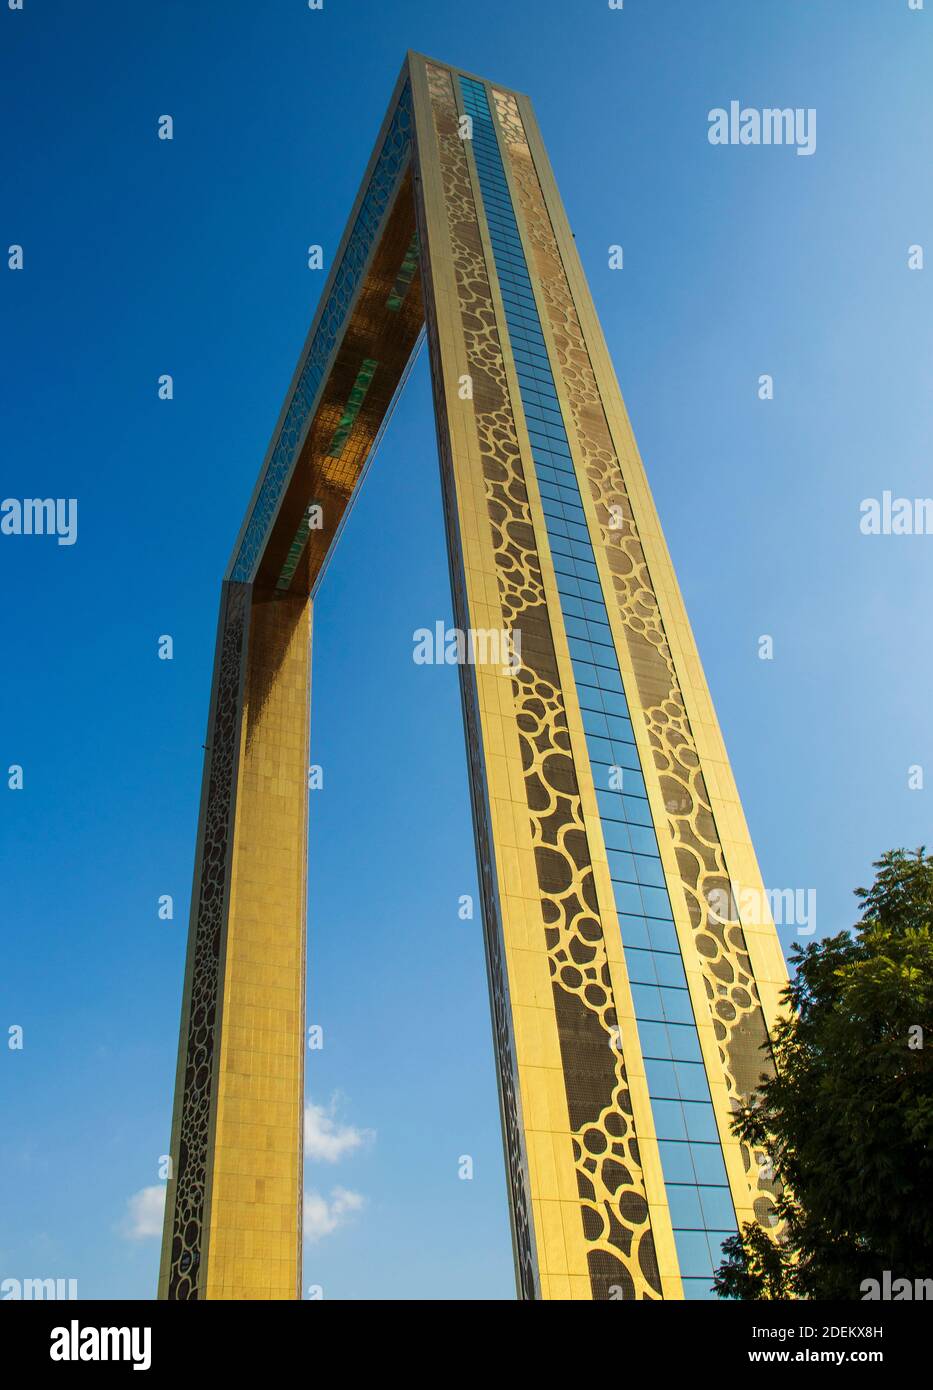 Popular sightseeing and attraction building known as Dubai Frame. UAE. Outdoors Stock Photo